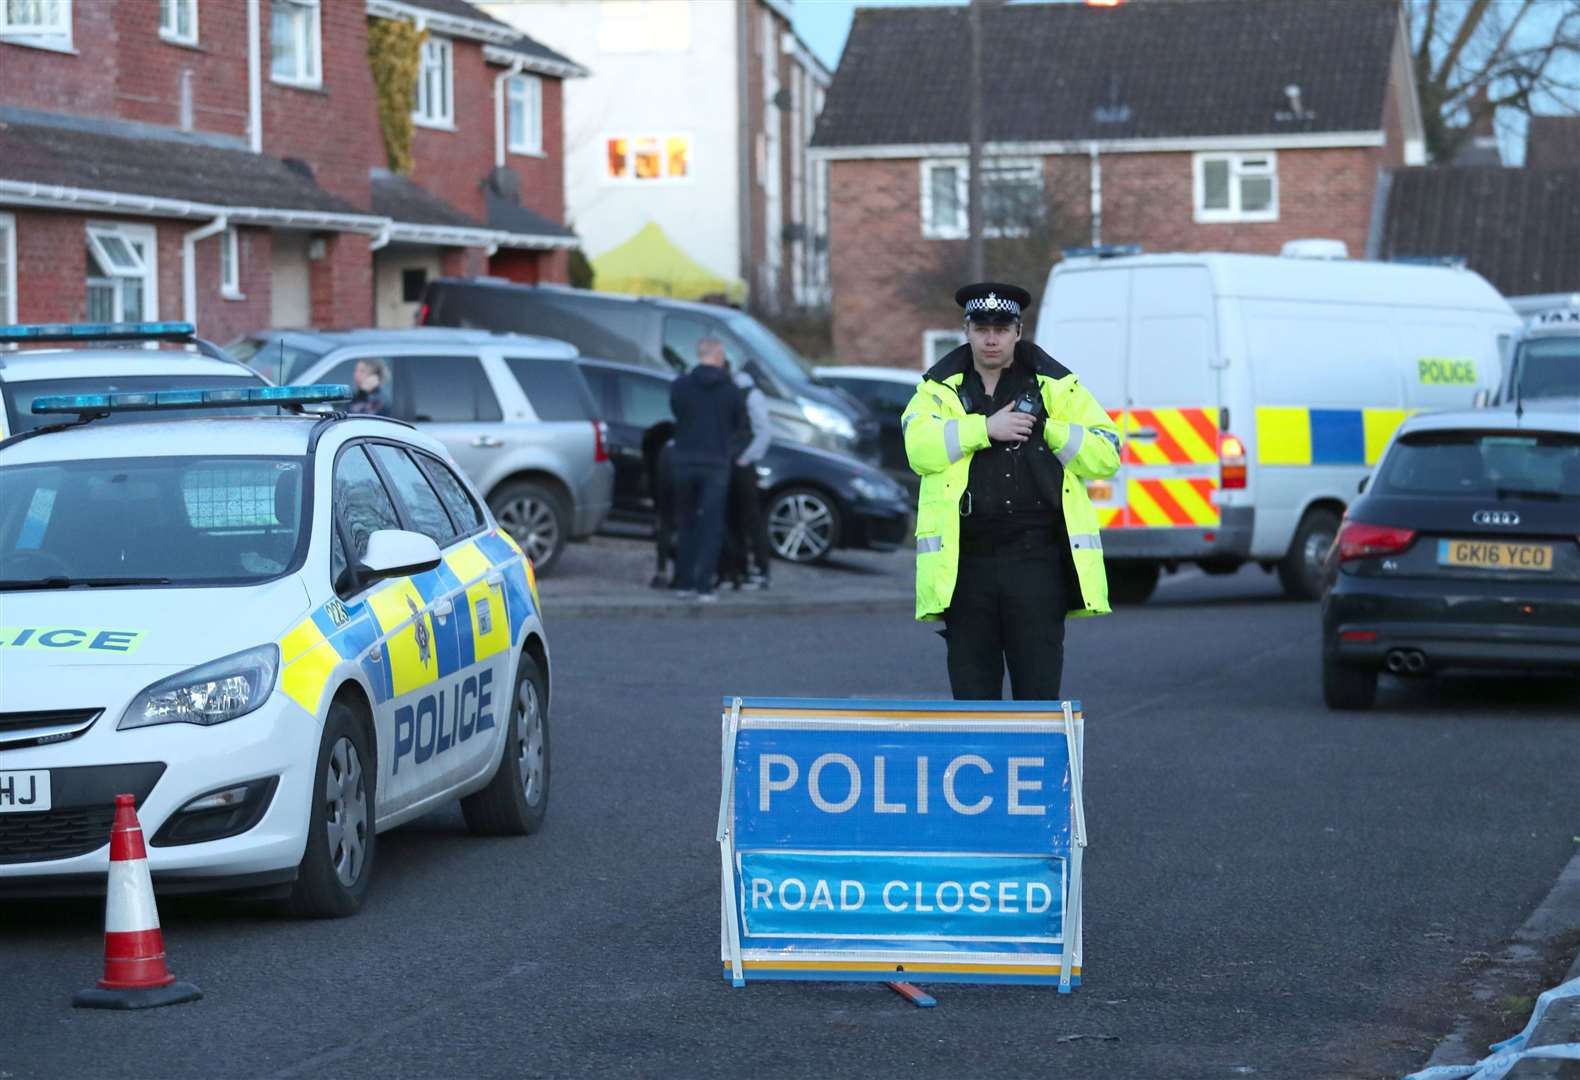 Police cordoned off the cul-de-sac in Salisbury containing the home of Sergei Skripal in 2018 (Andrew Matthews/PA)